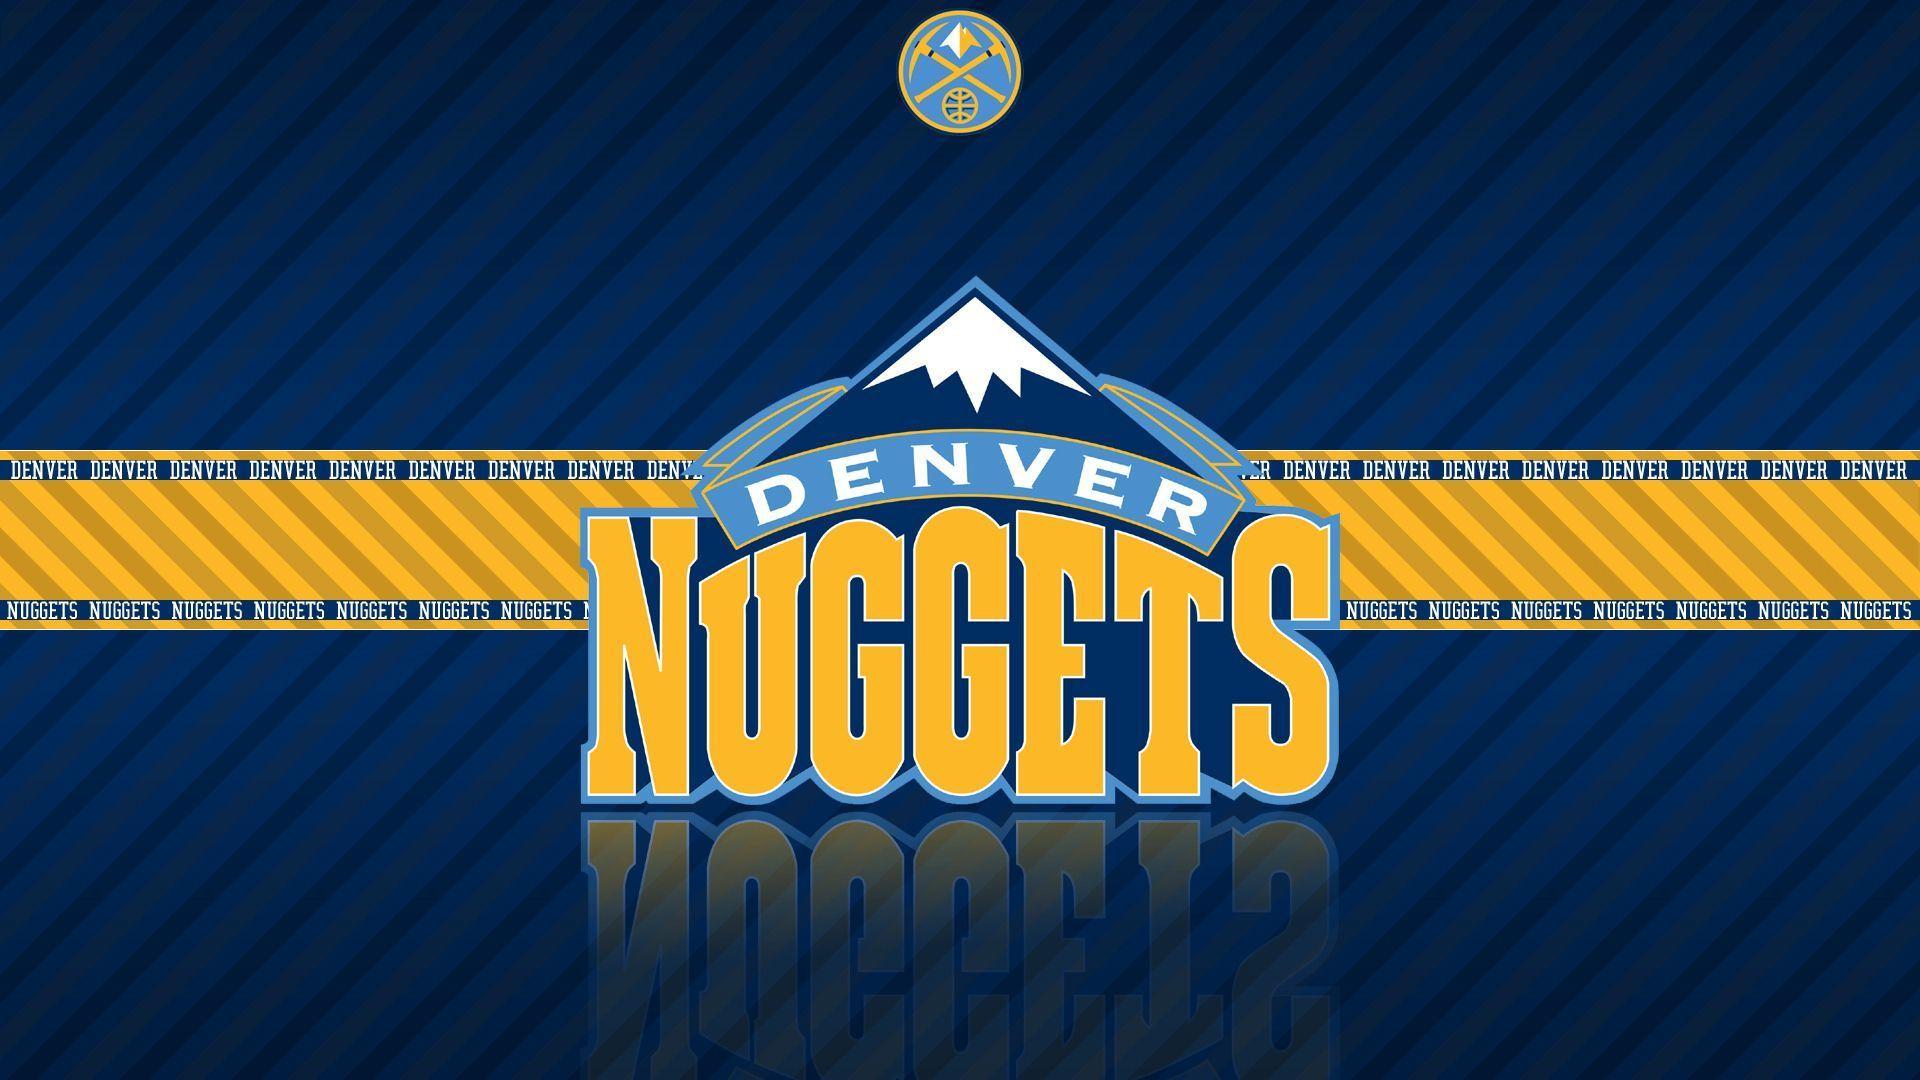 Nba Teams Wallpapers High Definition • Sports at ngepLuk